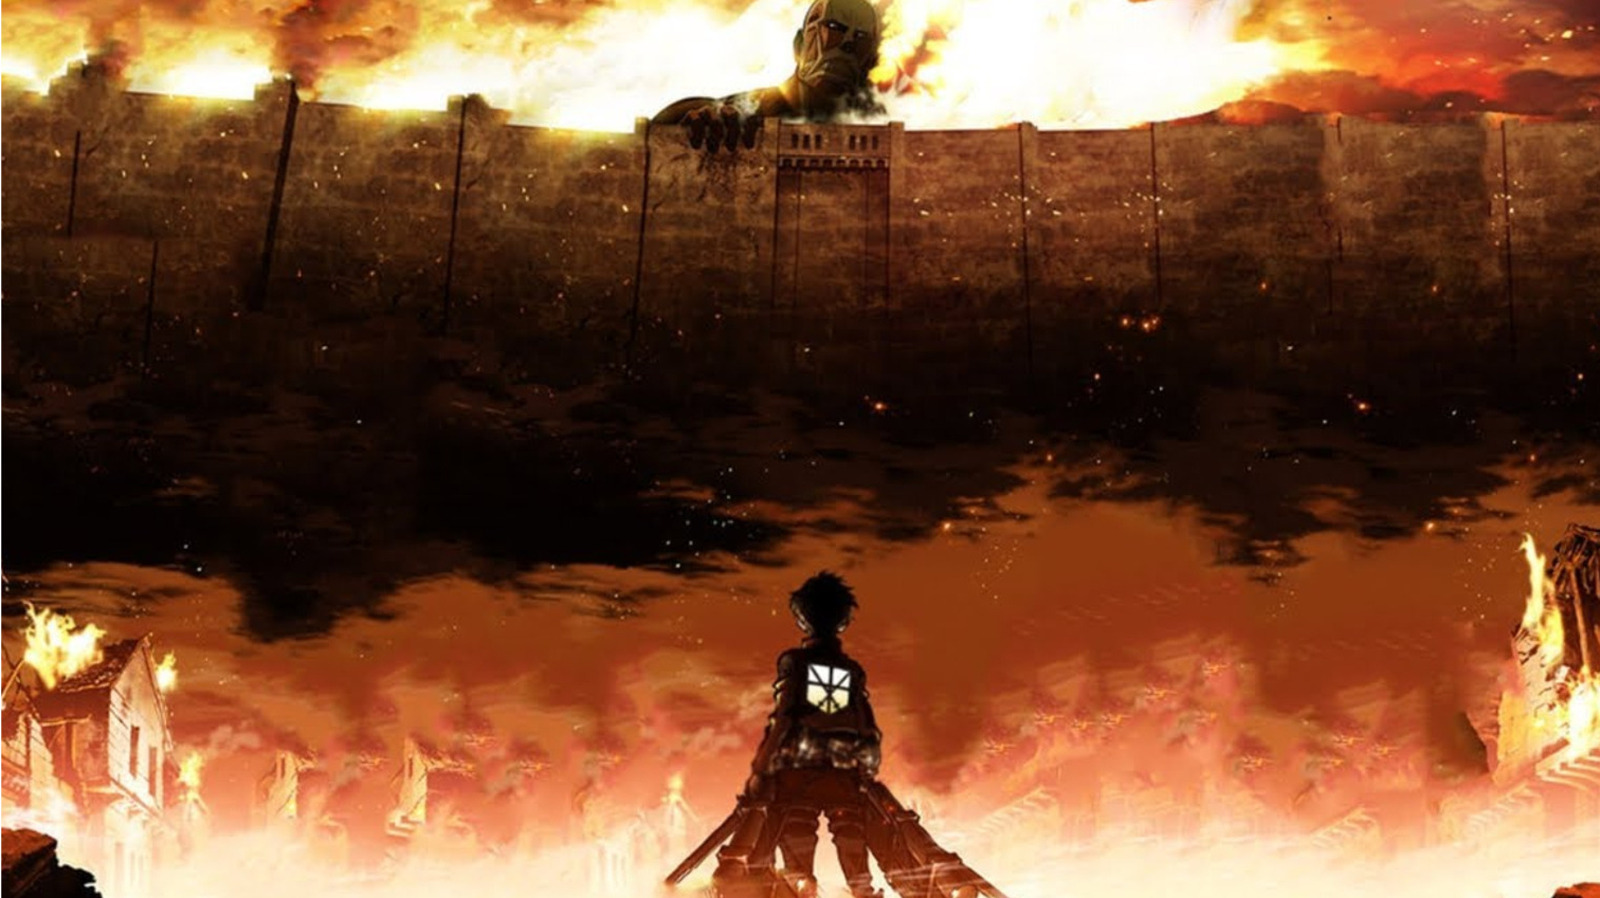 Attack on Titan live action: Status explained